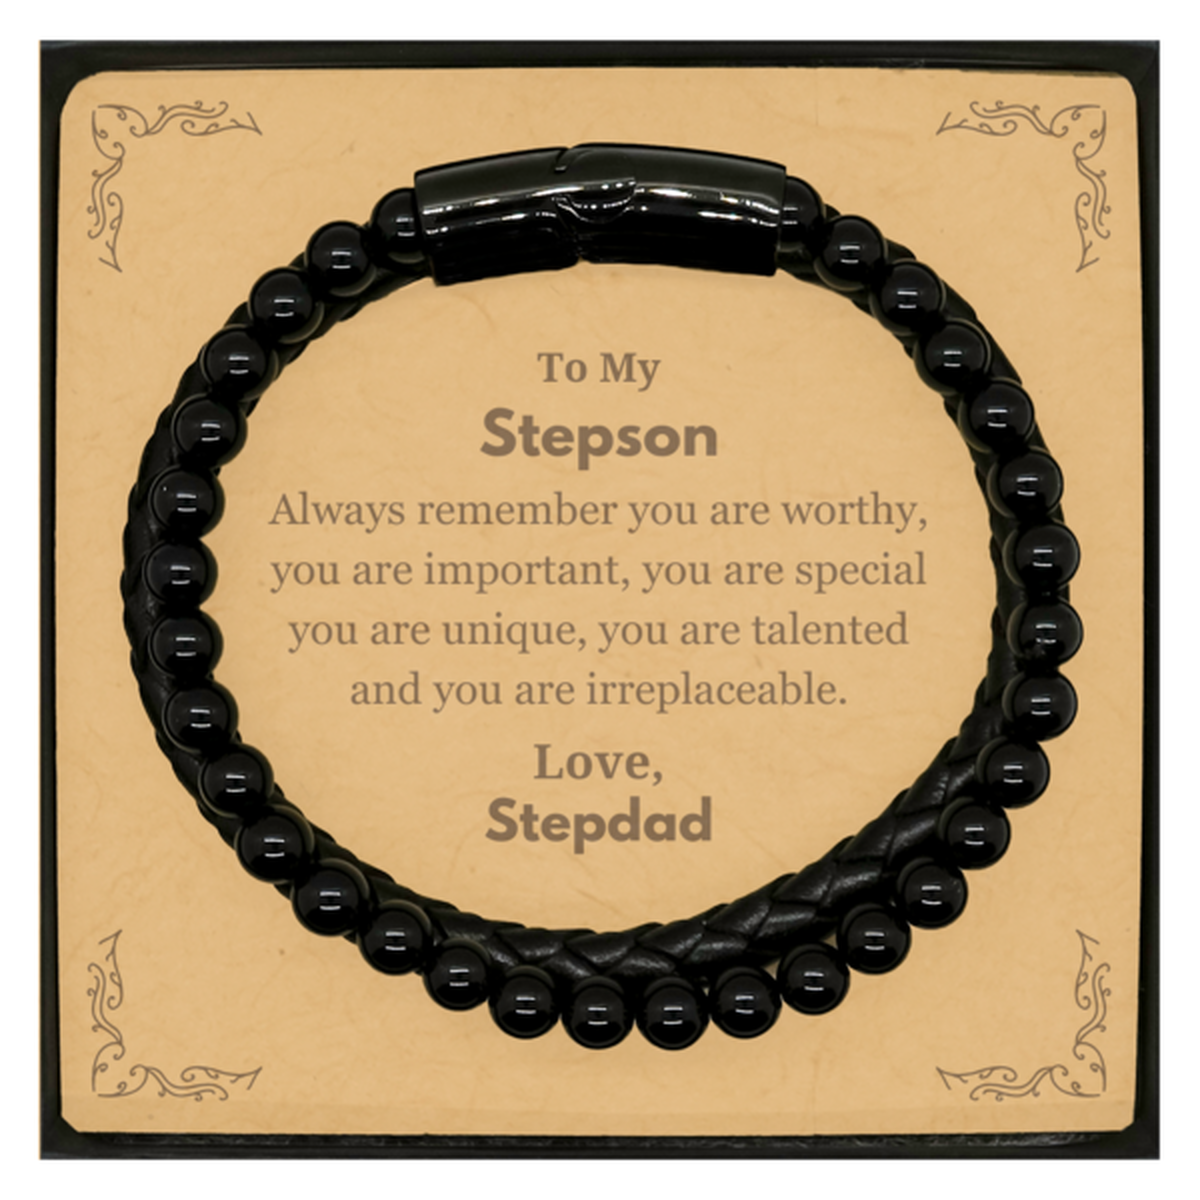 Stepson Birthday Gifts from Stepdad, Inspirational Stone Leather Bracelets for Stepson Christmas Graduation Gifts for Stepson Always remember you are worthy, you are important. Love, Stepdad